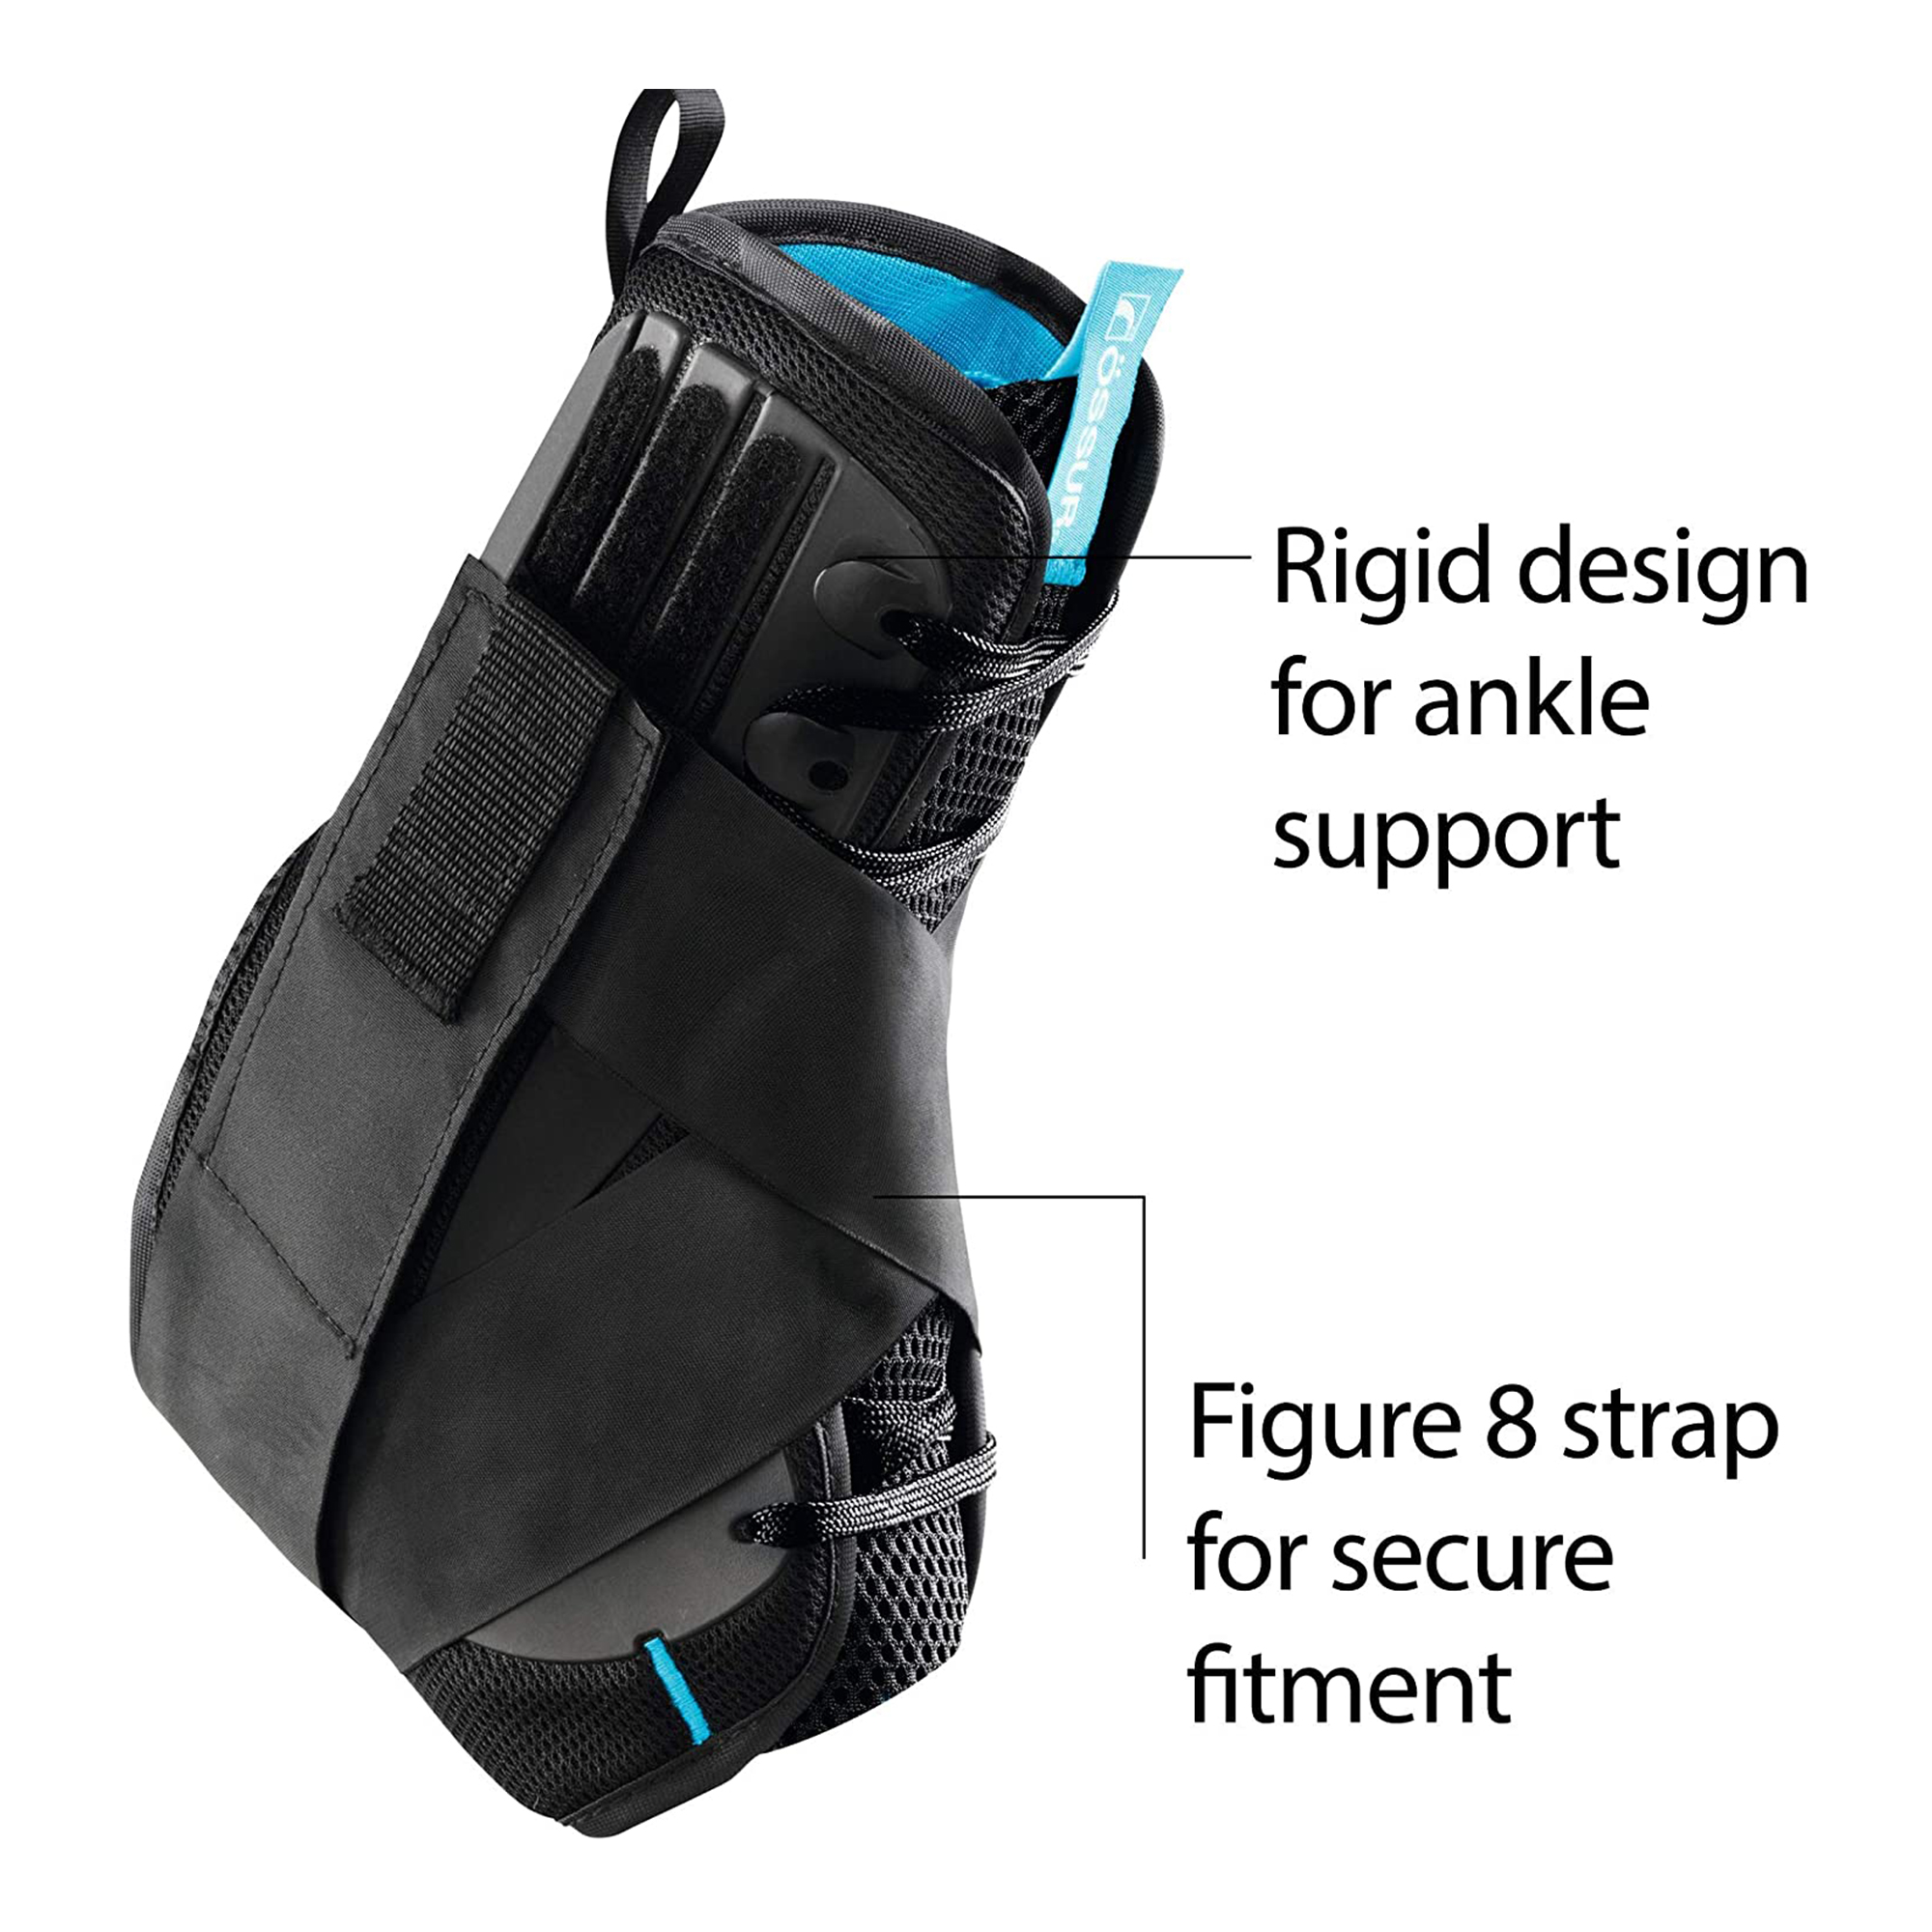 Quick Lace Up & Inversion/Eversion Control | Ossur Formfit Ankle Brace with Figure 8 Strapping For Post Injury or Preventive Use in Basketball Large Football| Lightweight Material Soccer 